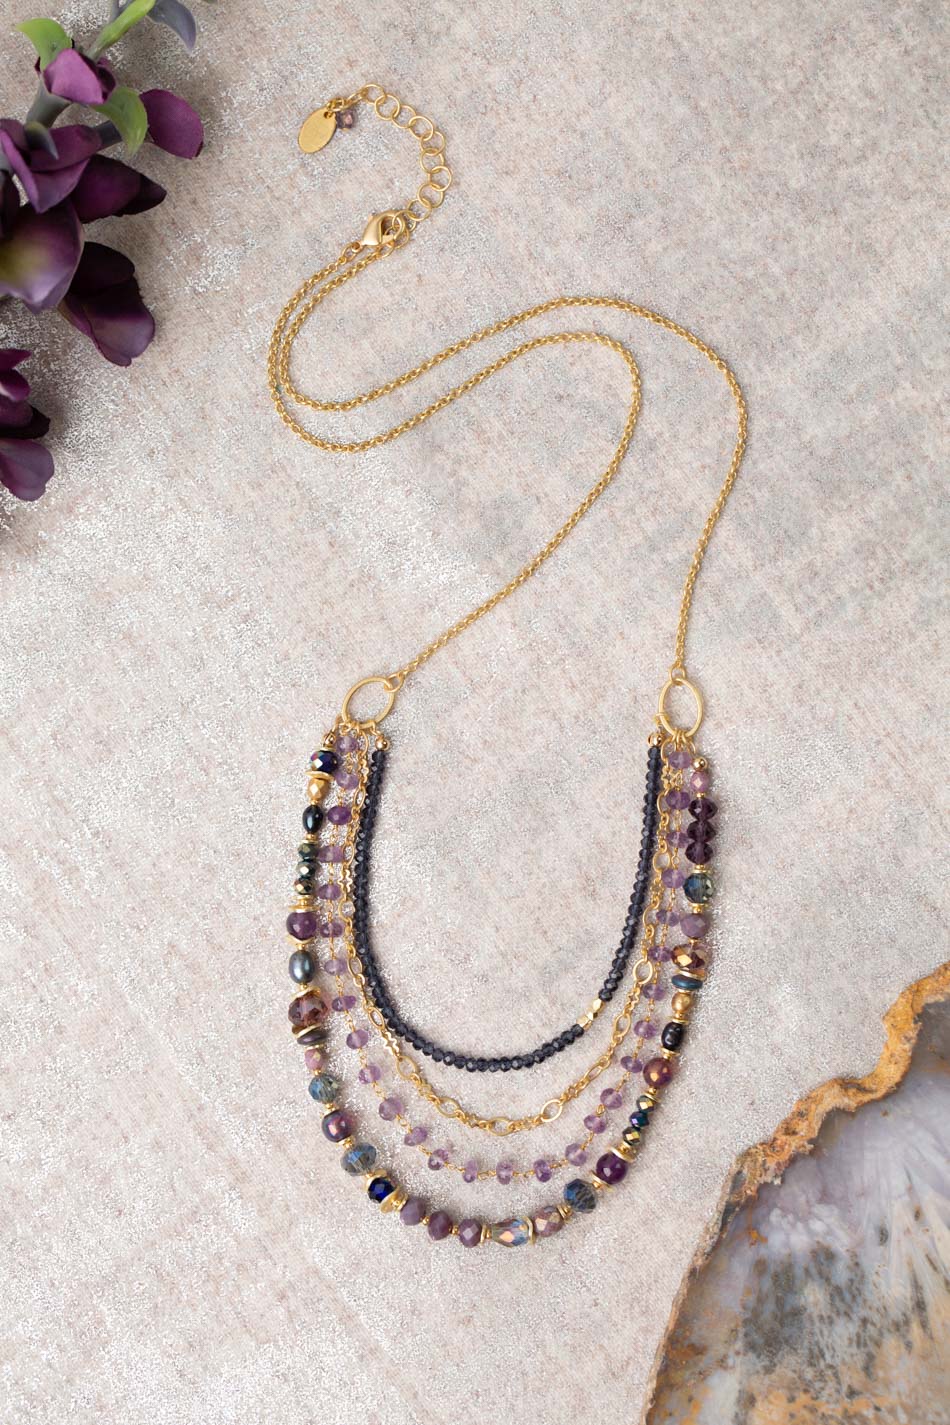 Midnight 24-26" Amethyst, Czech Glass, Pearl Multistrand Necklace